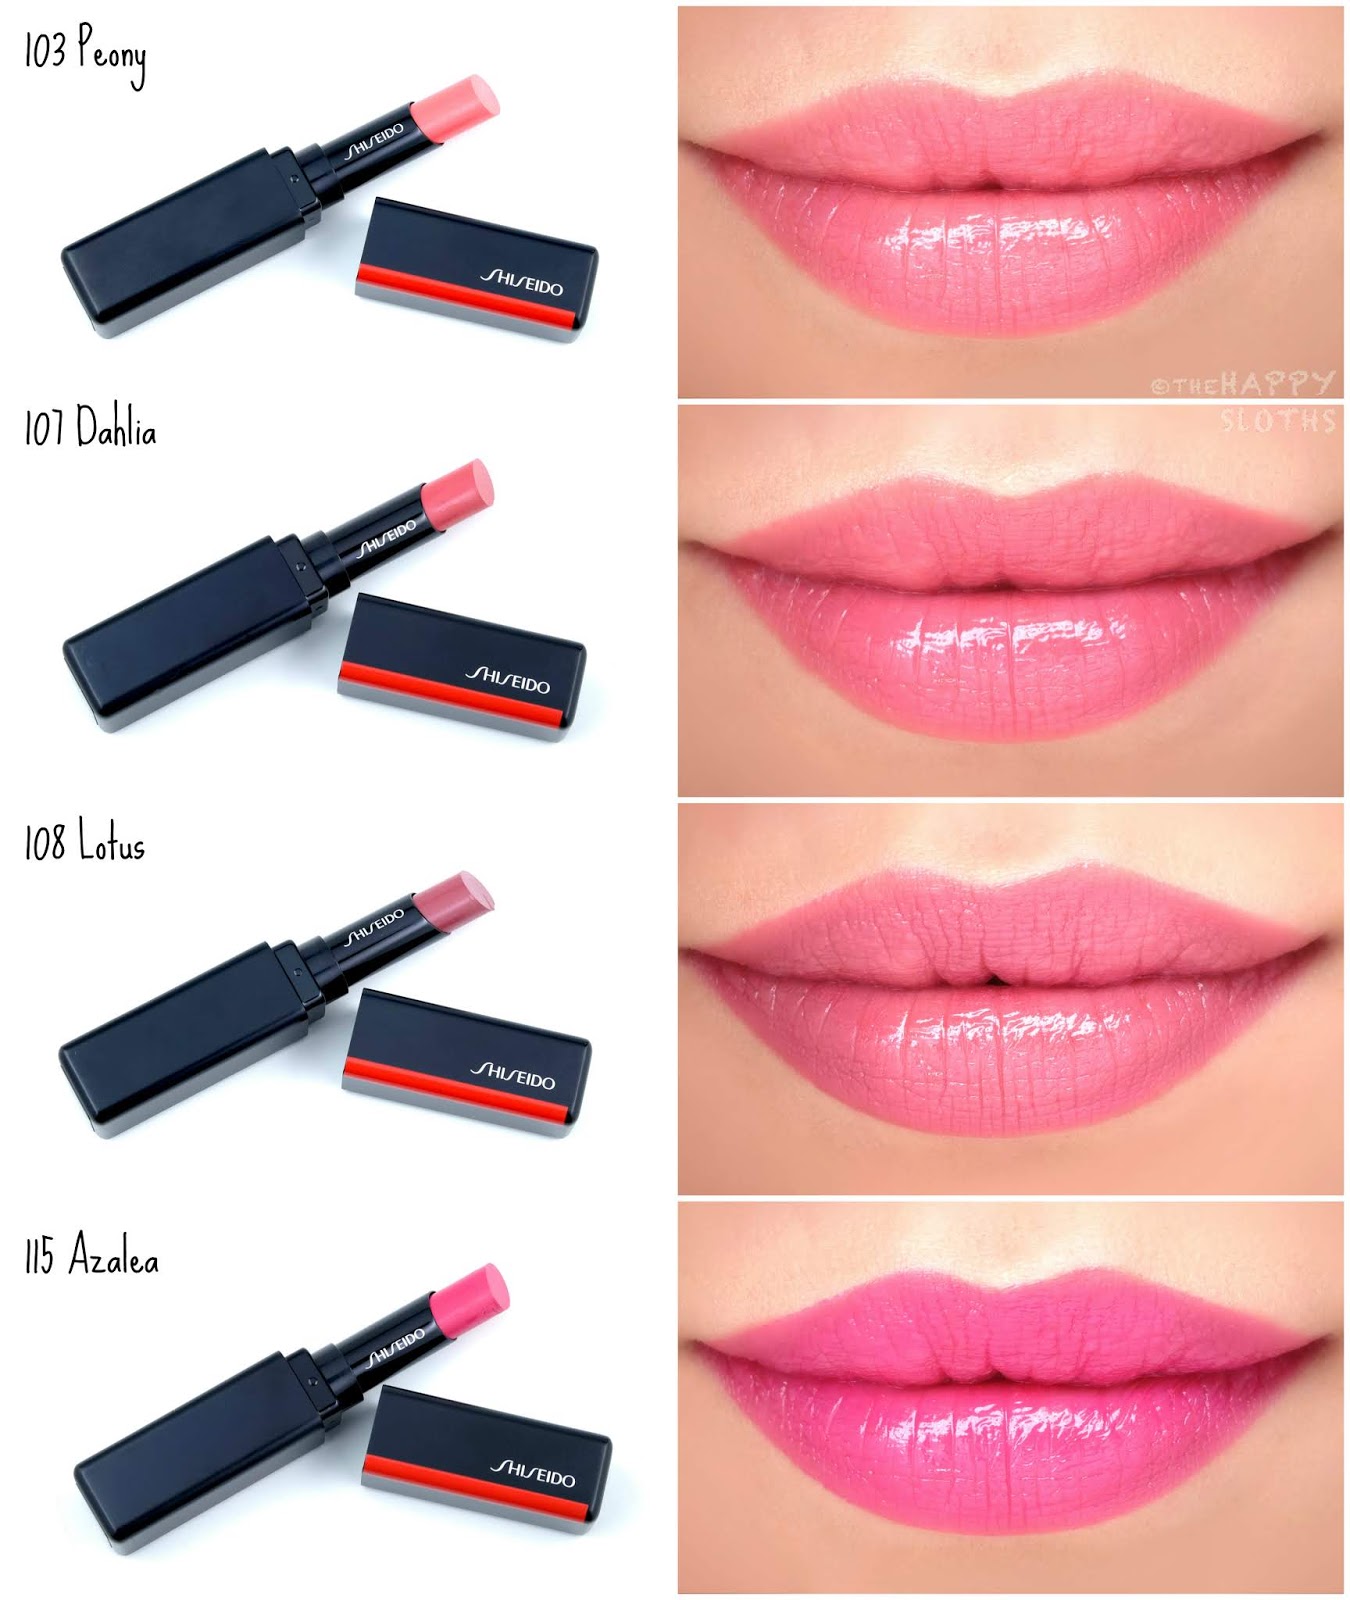 Shiseido | ColorGel LipBalm: Review and Swatches